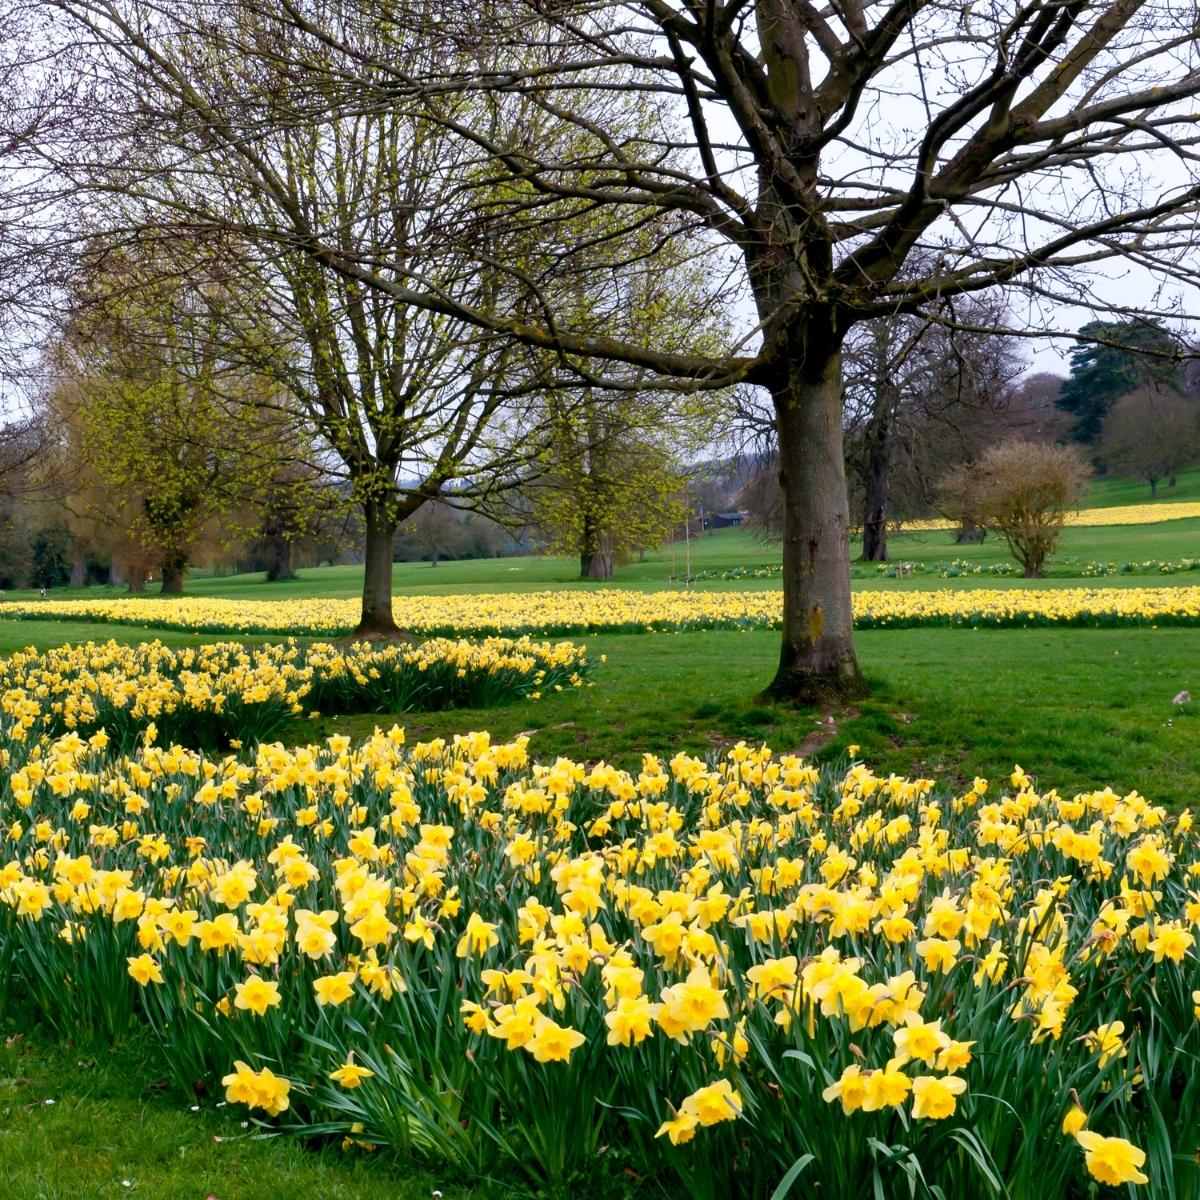 field with daffodils growing under trees that have not yet leafed out